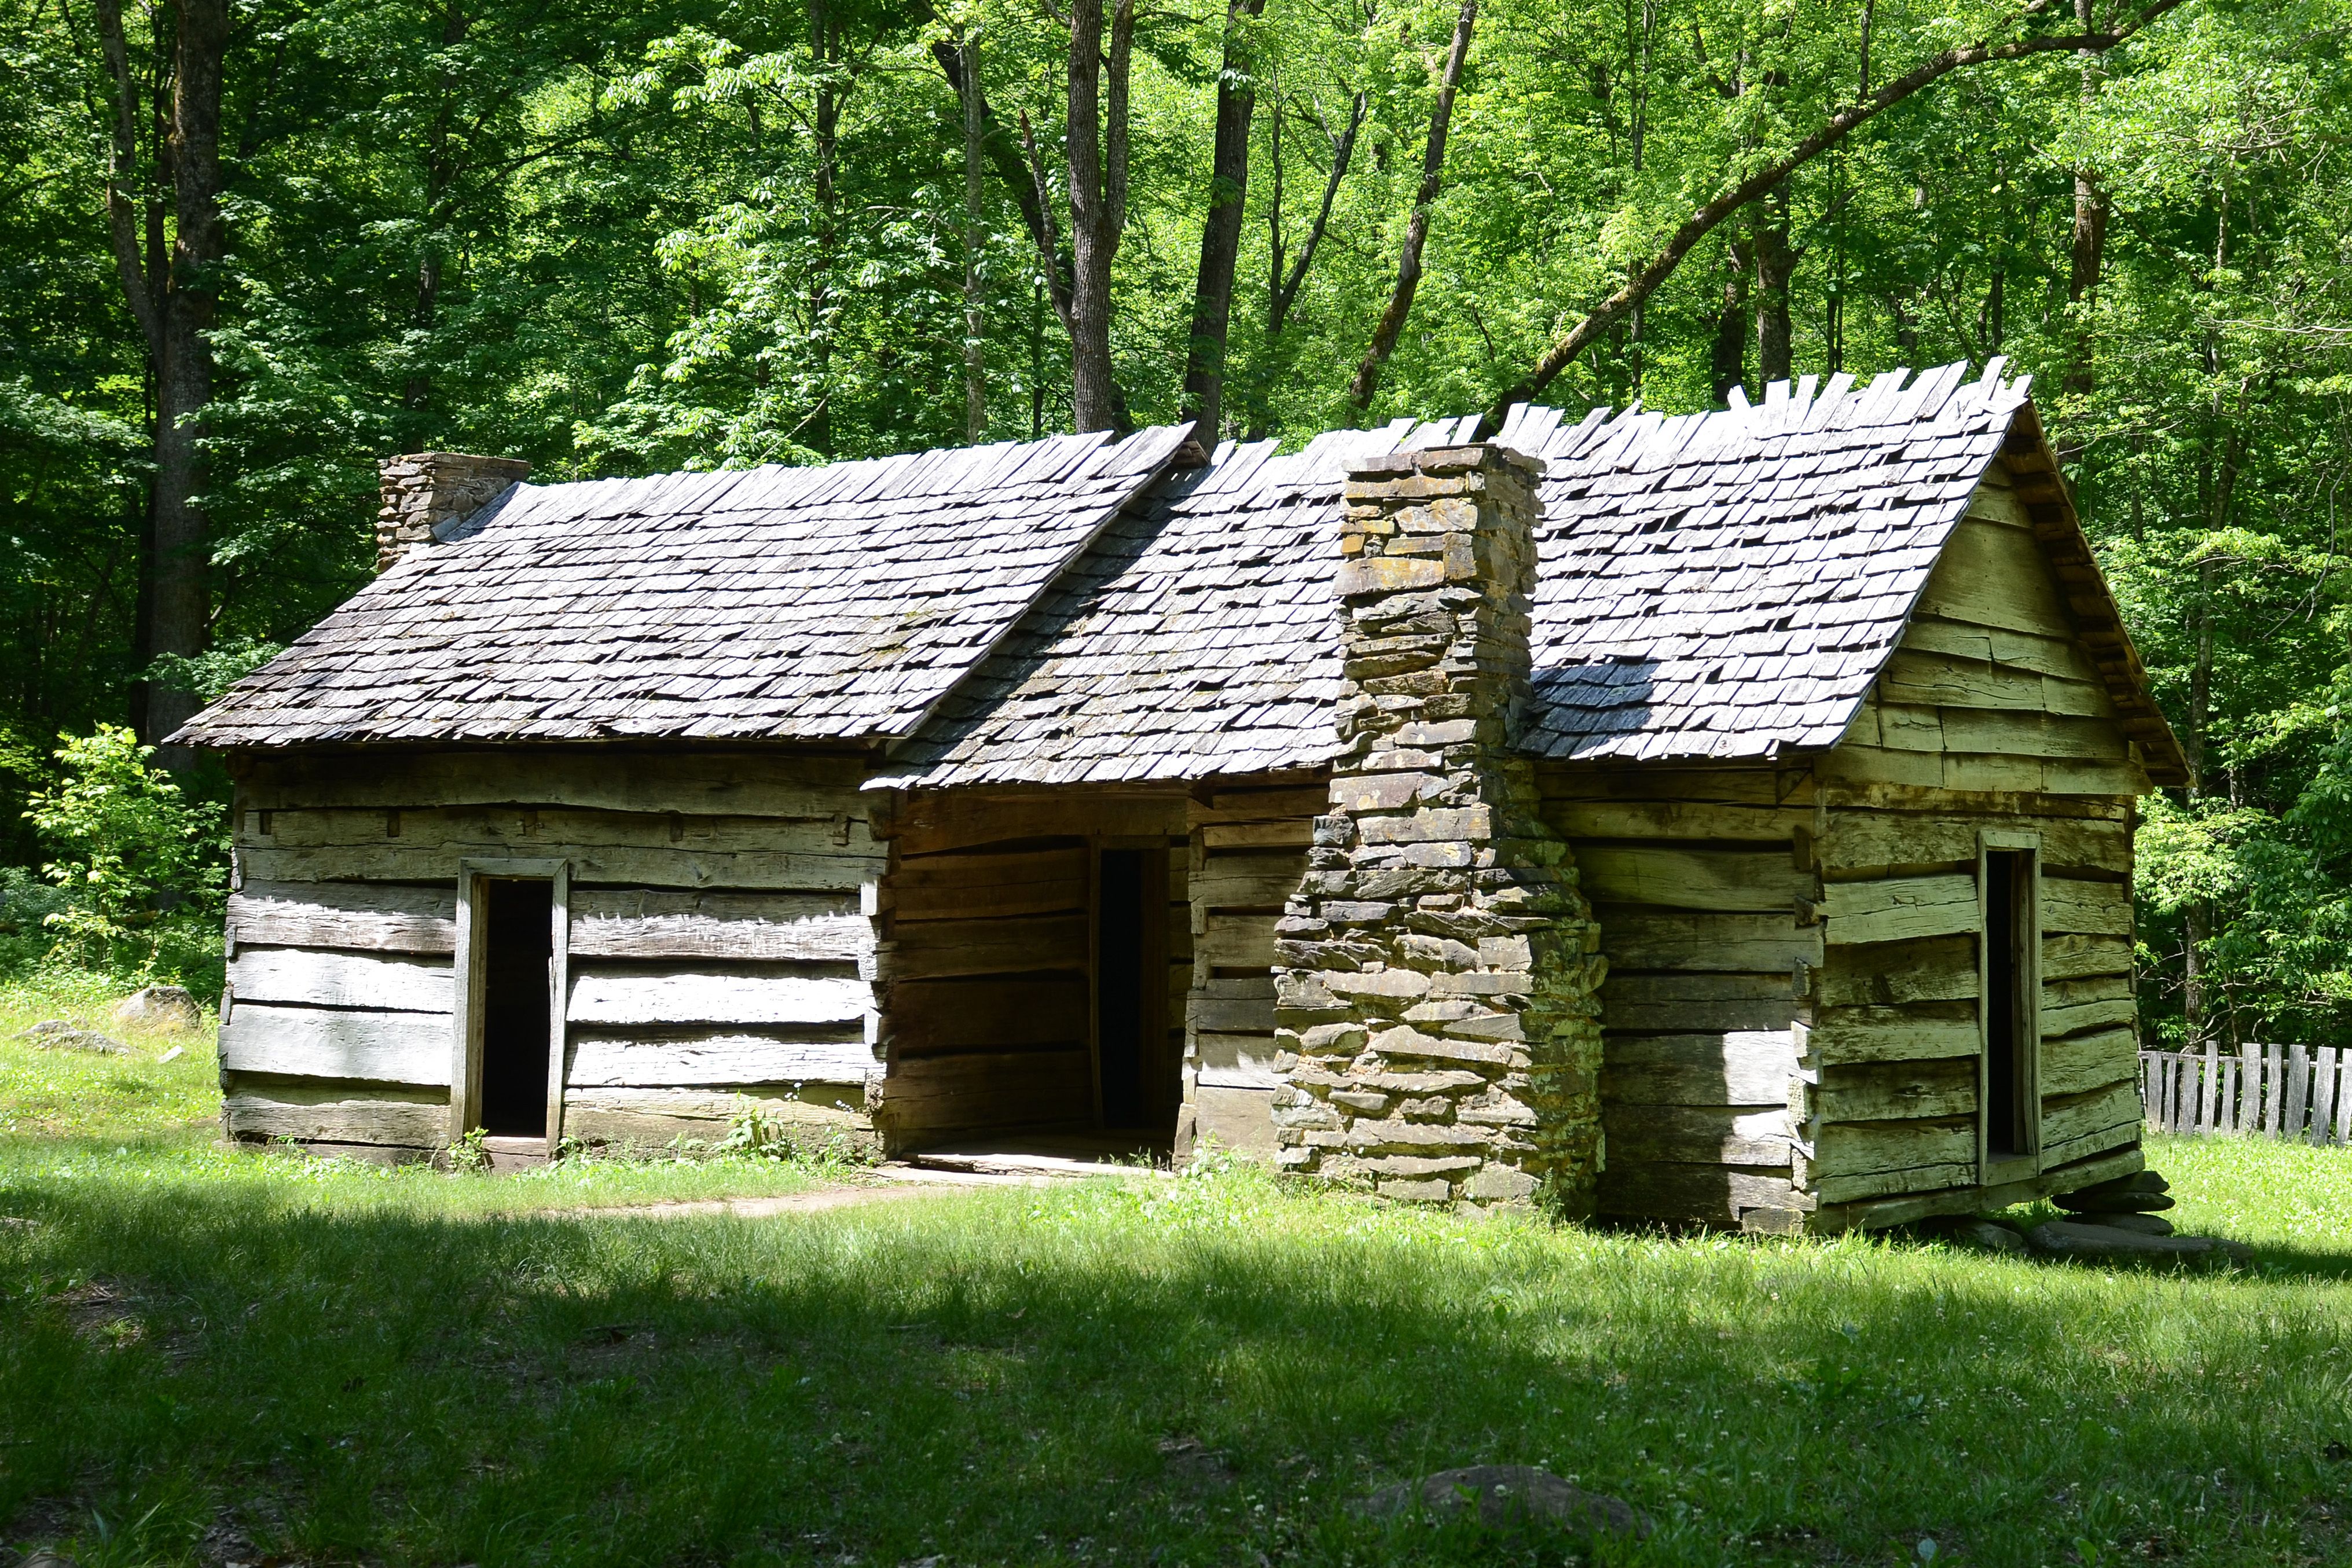 Wallpaper, park, old, USA, mountains, history, forest, outdoors, early, us, log, cabin, woods, tn, Tennessee, south, historic, east, southern, national, american, homestead, smoky, eastern 4063x2709